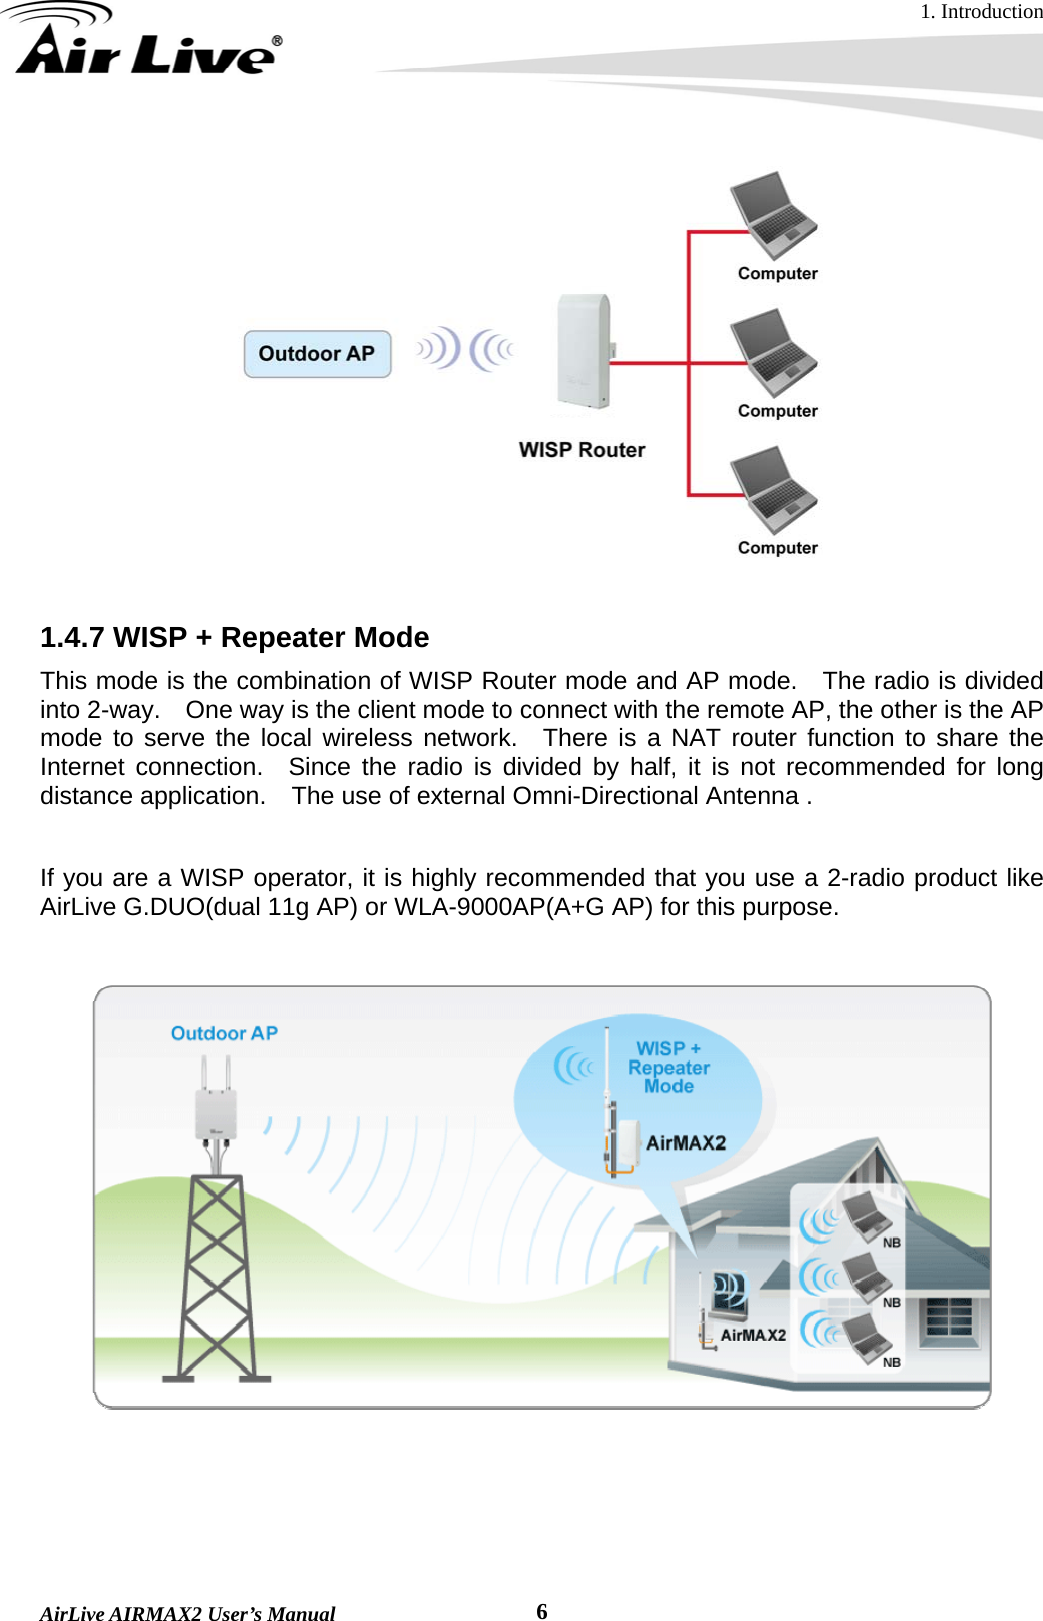 1. Introduction  AirLive AIRMAX2 User’s Manual  6  1.4.7 WISP + Repeater Mode This mode is the combination of WISP Router mode and AP mode.   The radio is divided into 2-way.    One way is the client mode to connect with the remote AP, the other is the AP mode to serve the local wireless network.  There is a NAT router function to share the Internet connection.  Since the radio is divided by half, it is not recommended for long distance application.    The use of external Omni-Directional Antenna .  If you are a WISP operator, it is highly recommended that you use a 2-radio product like AirLive G.DUO(dual 11g AP) or WLA-9000AP(A+G AP) for this purpose.      